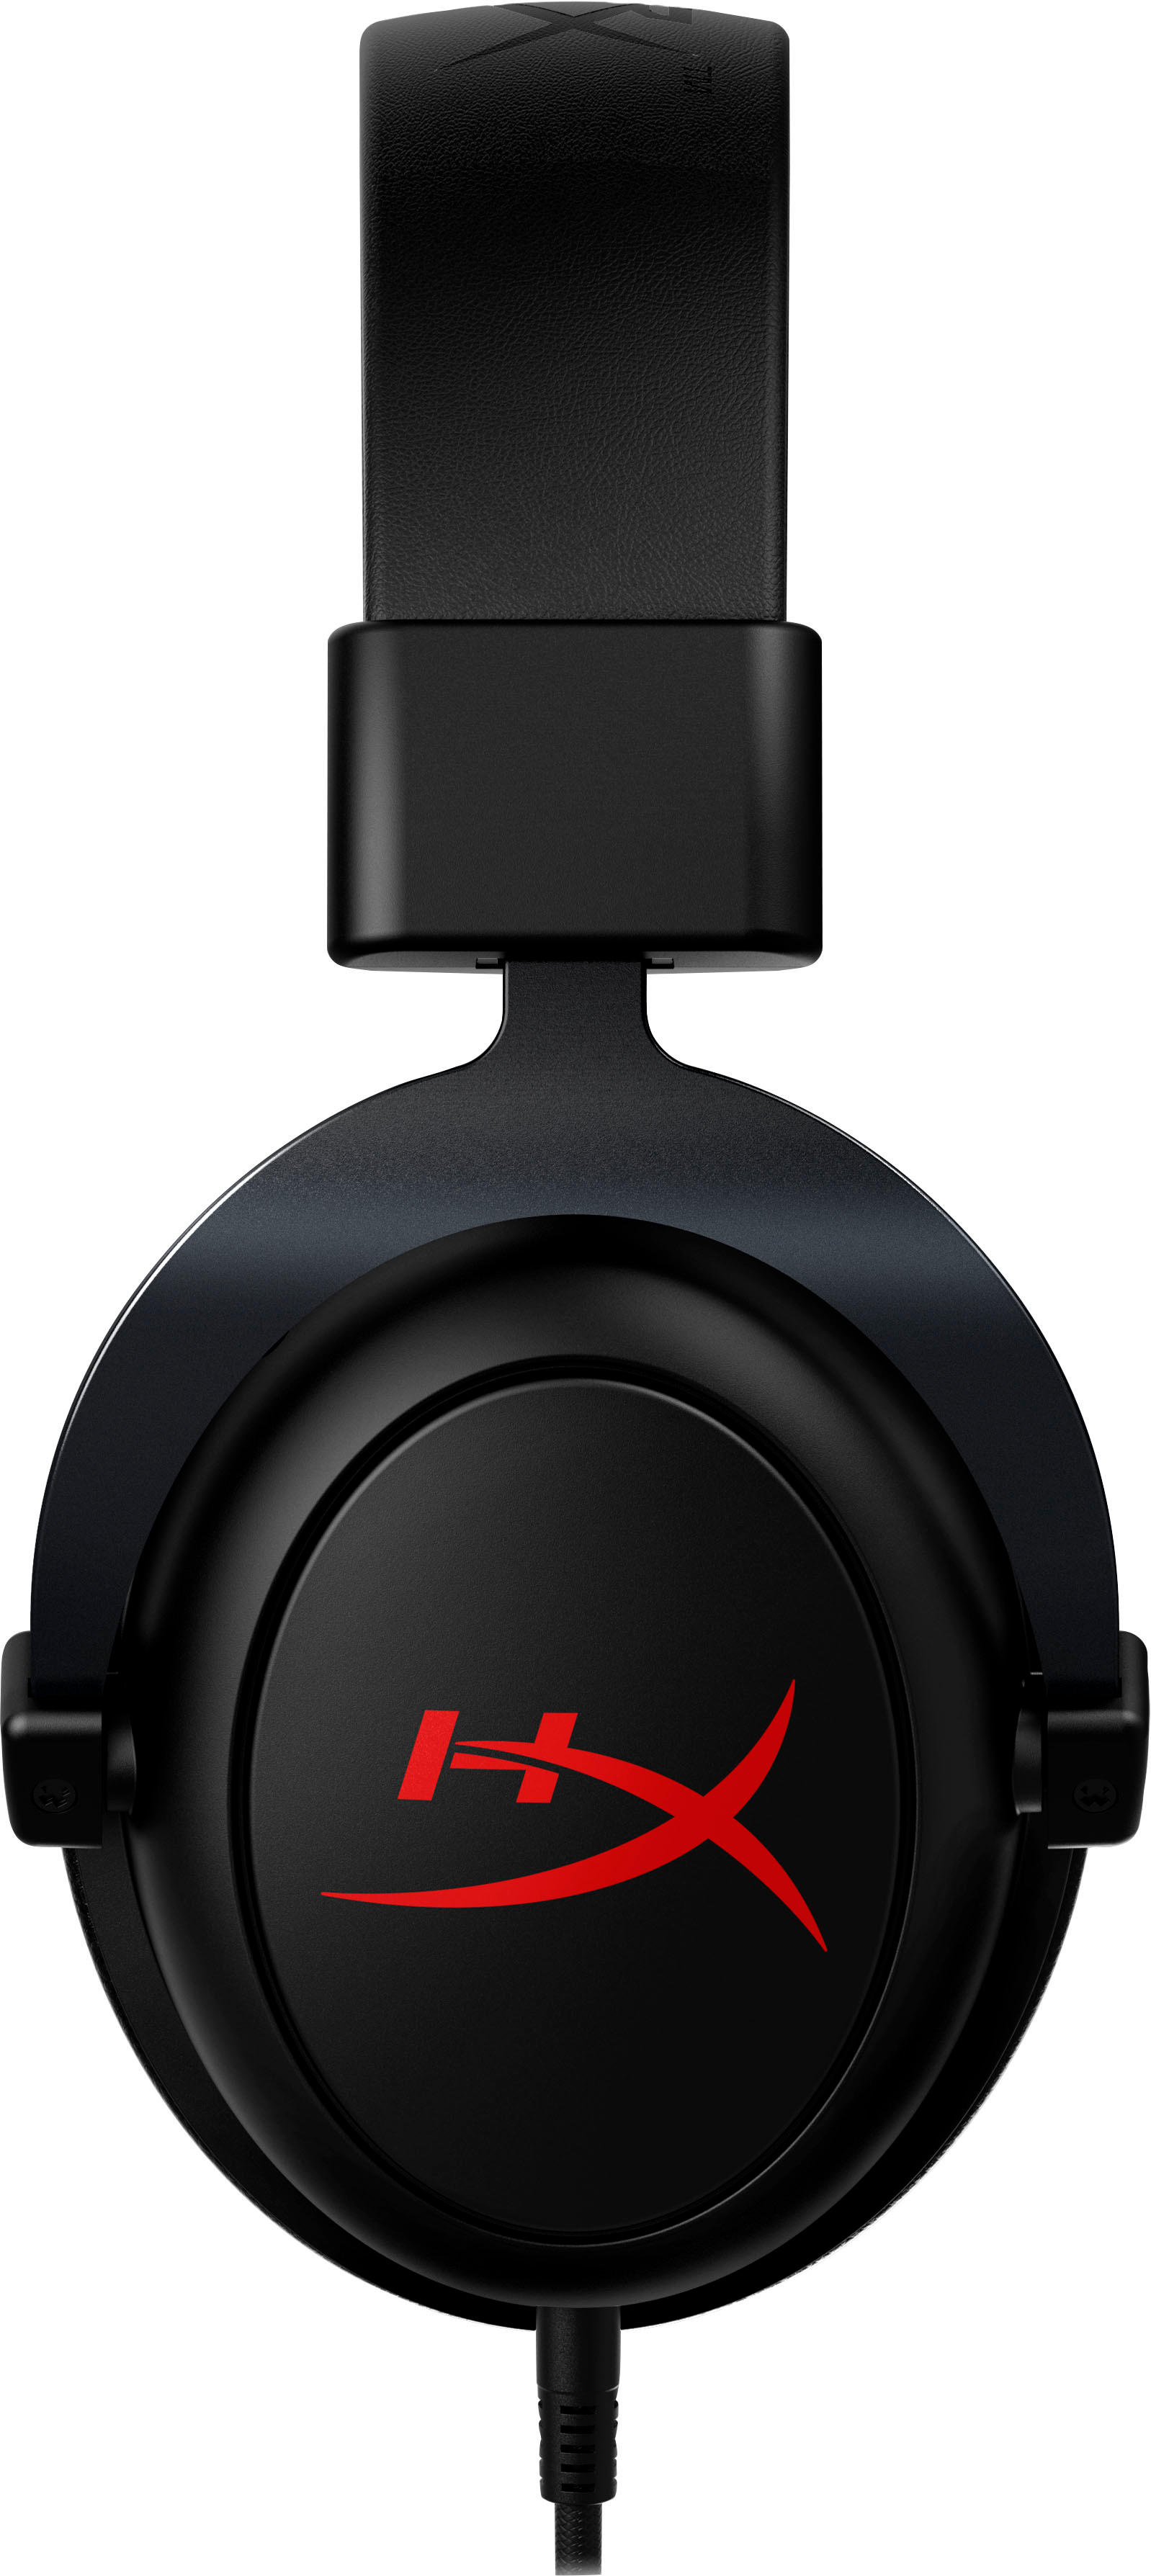 Angle View: HyperX - Cloud Core Wireless Gaming Headset - Black